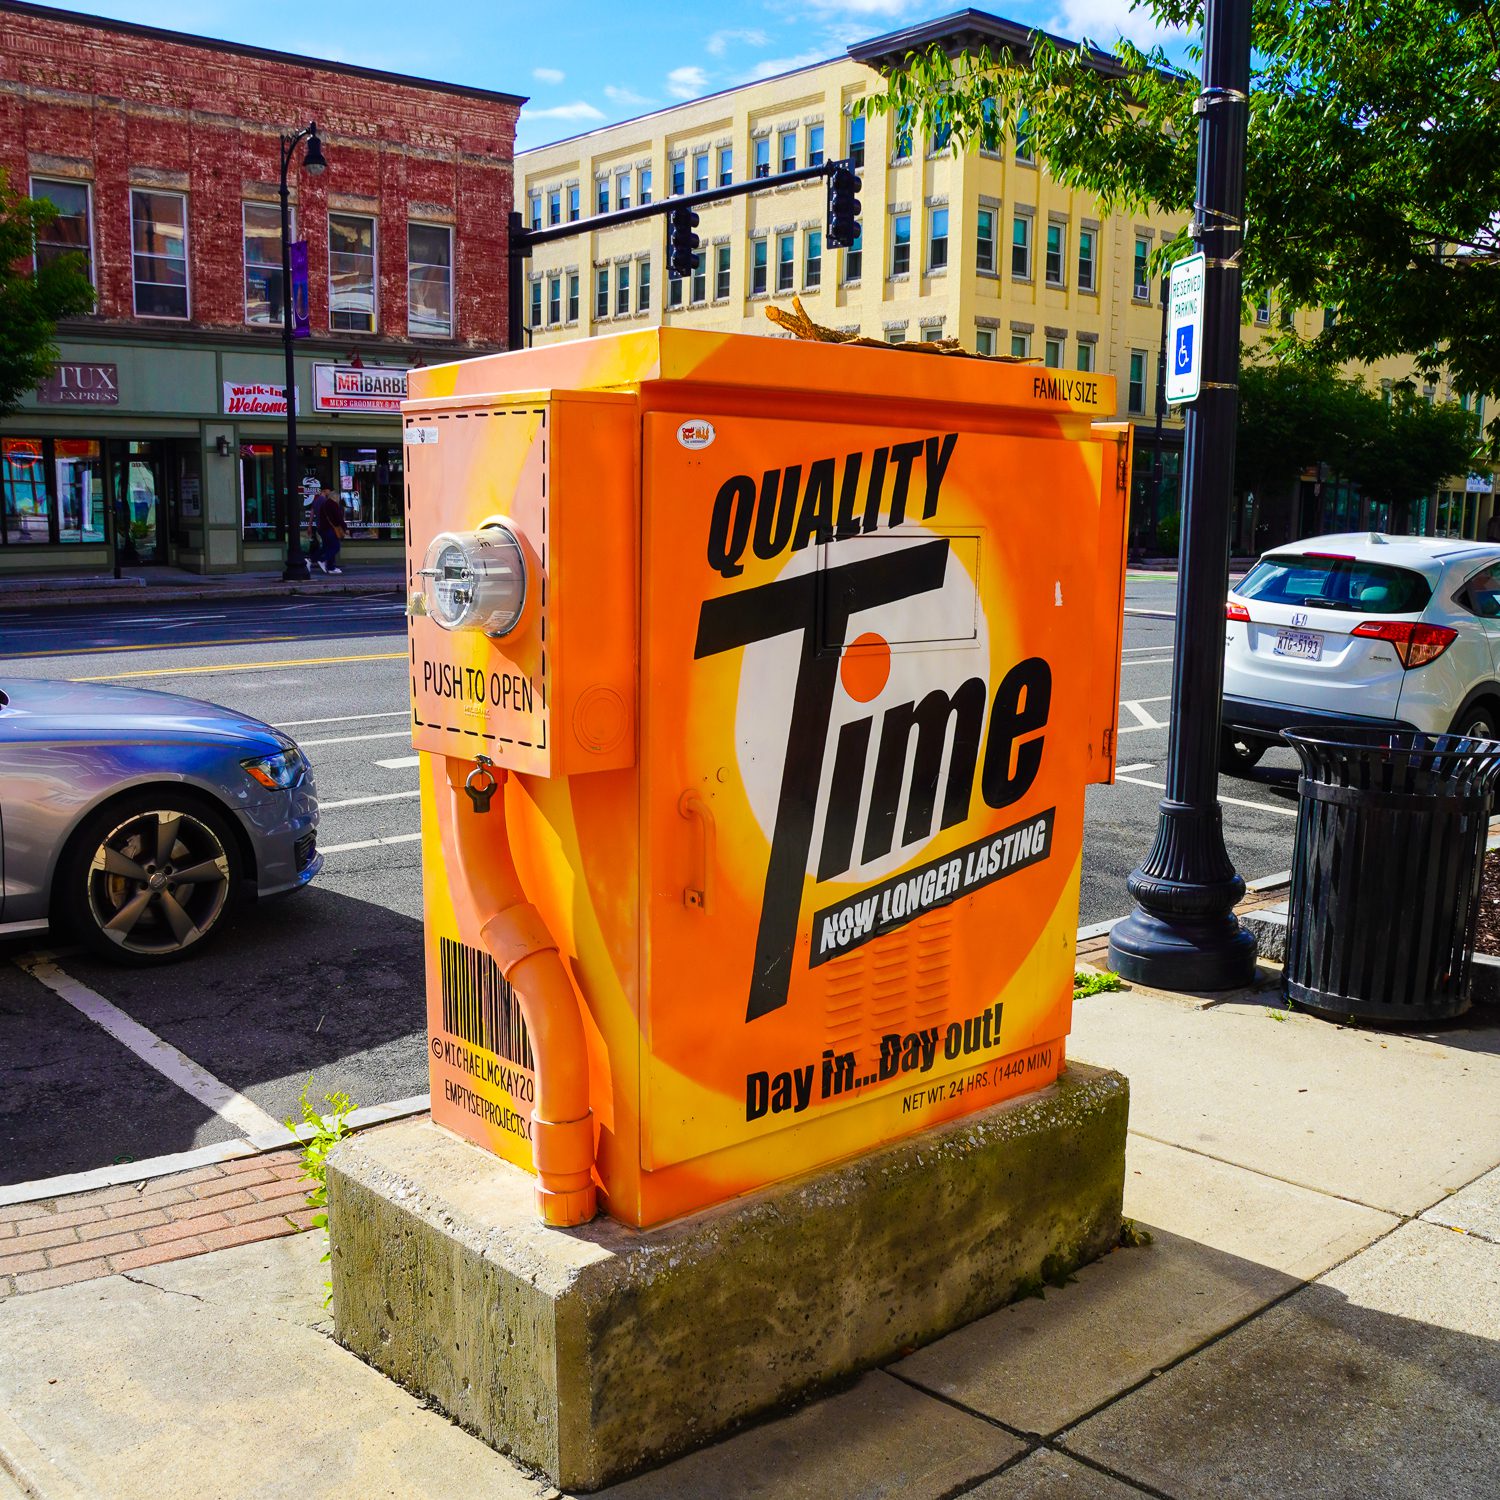 Public art in Pittsfield: "Quality Time."